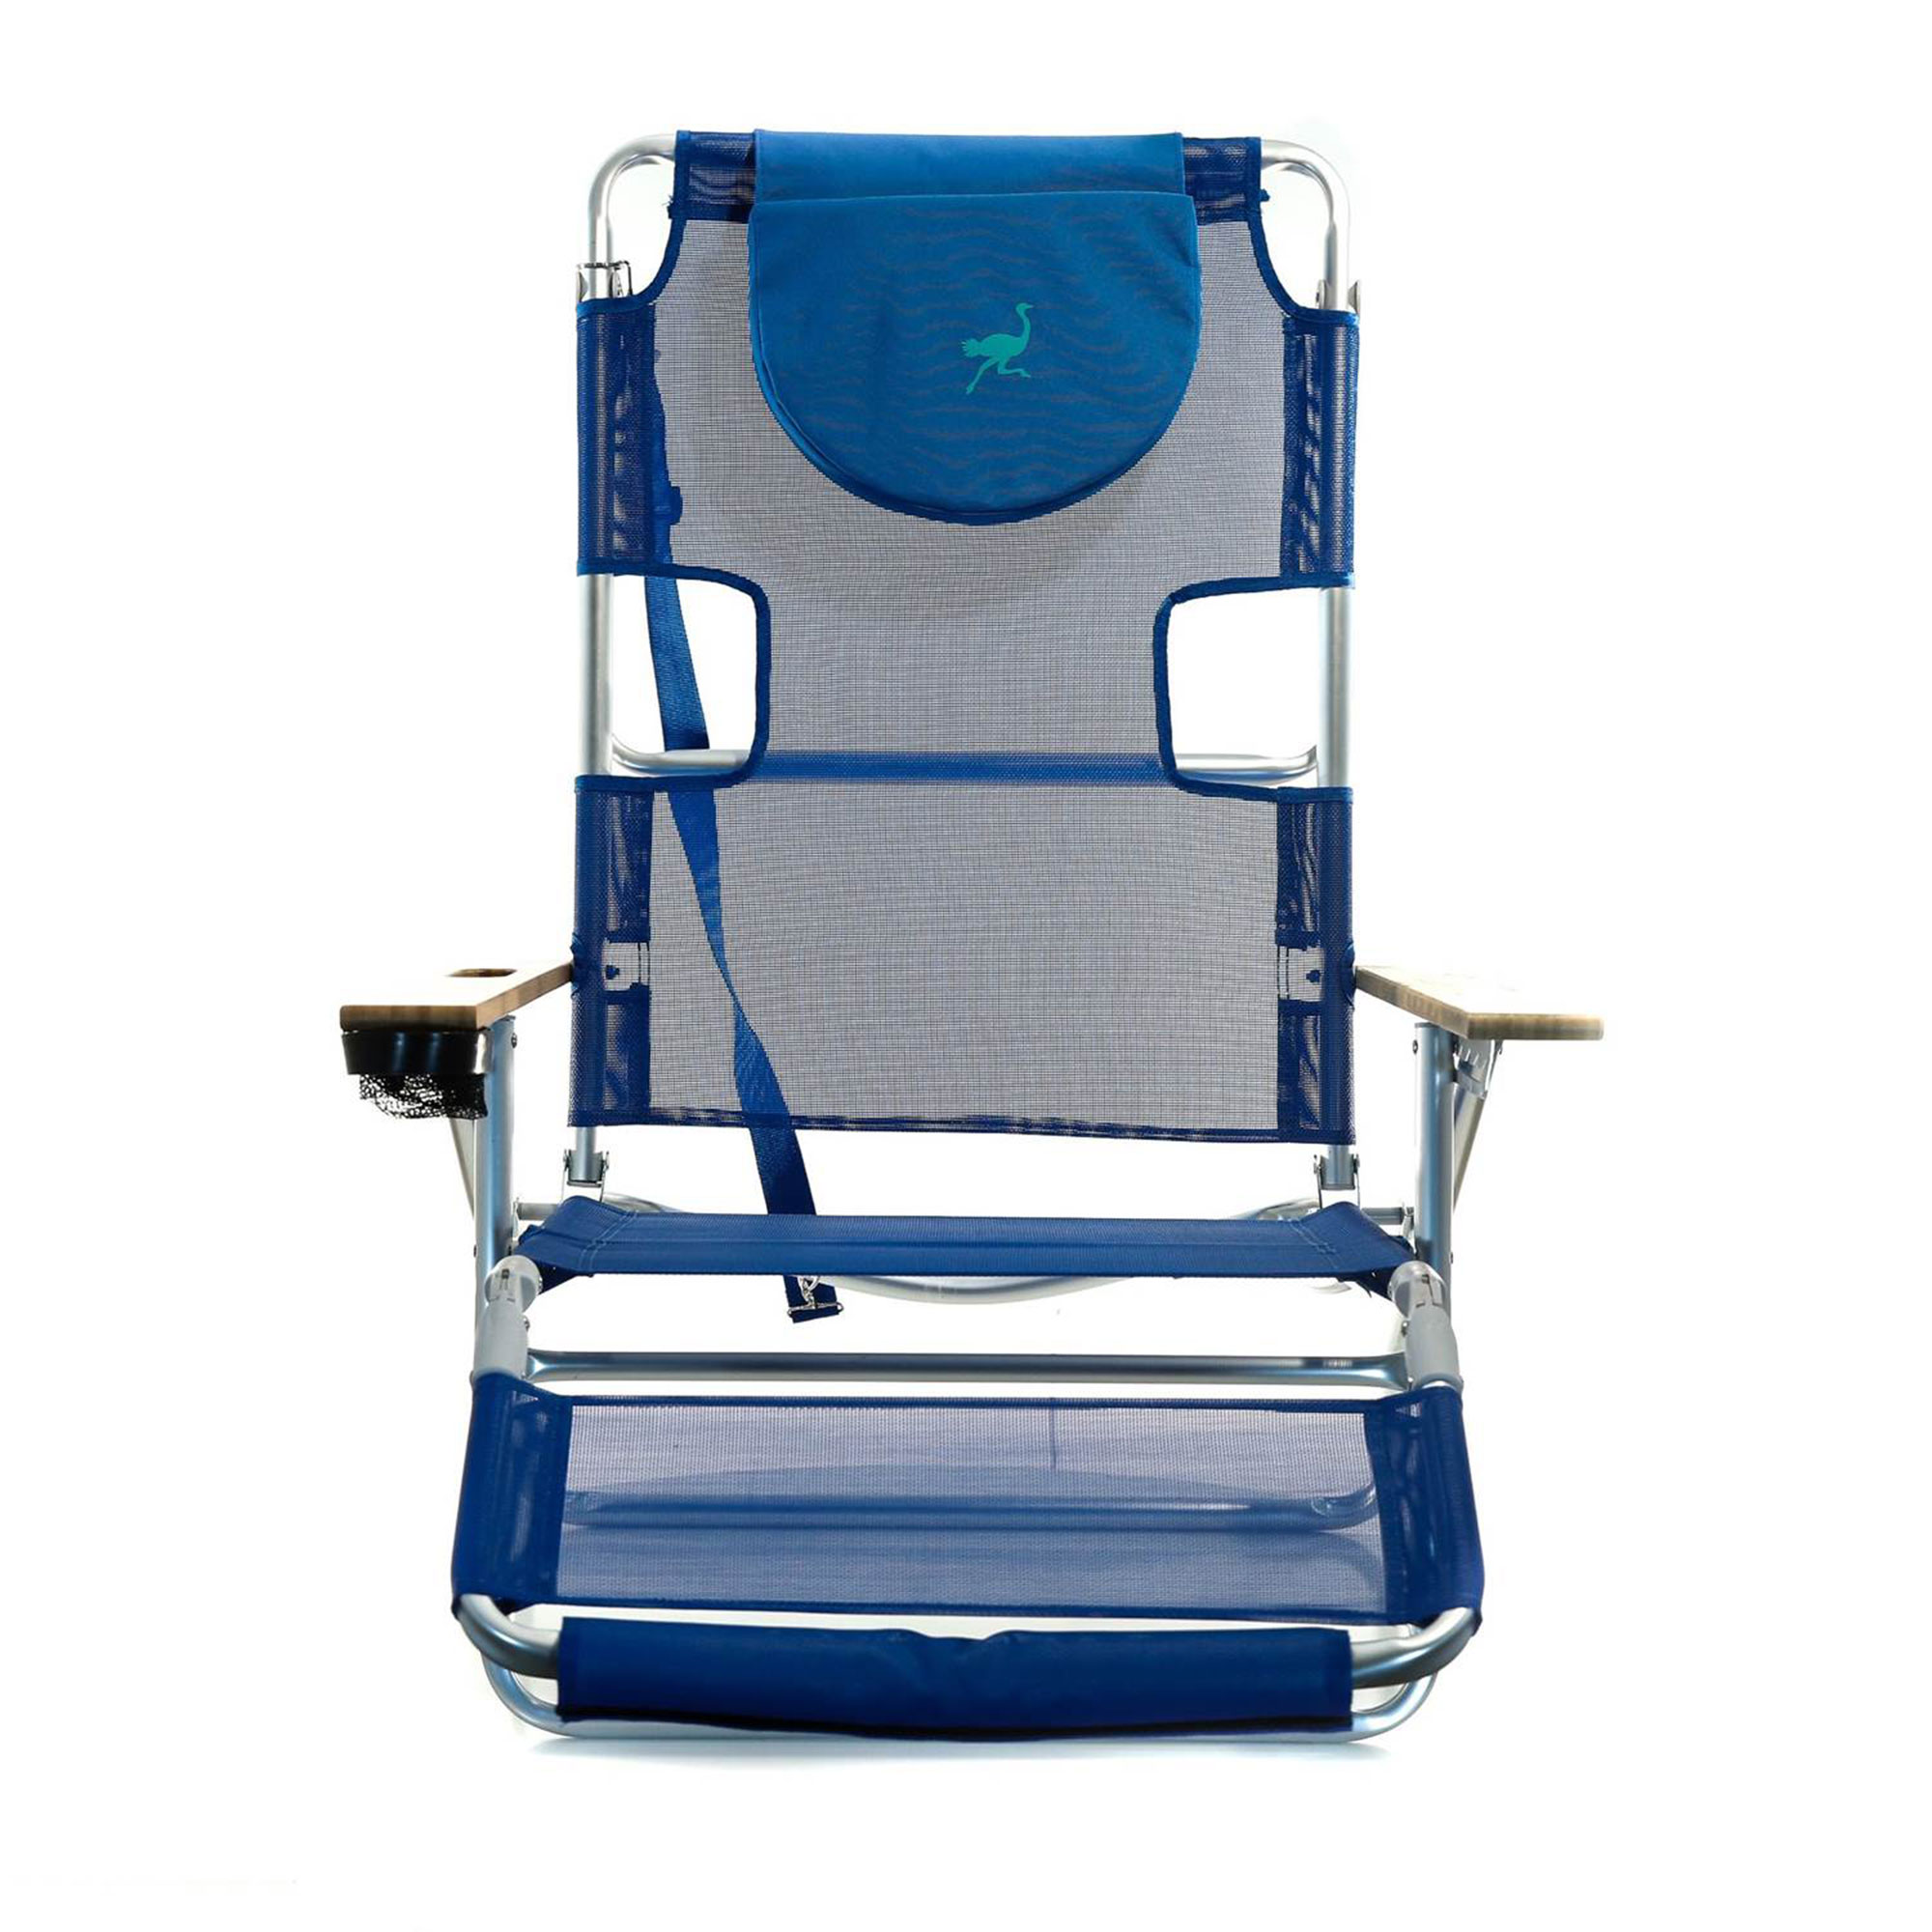 Ostrich 3N1 Lightweight Outdoor Beach Lounge Chair with Footrest, Blue - image 5 of 8